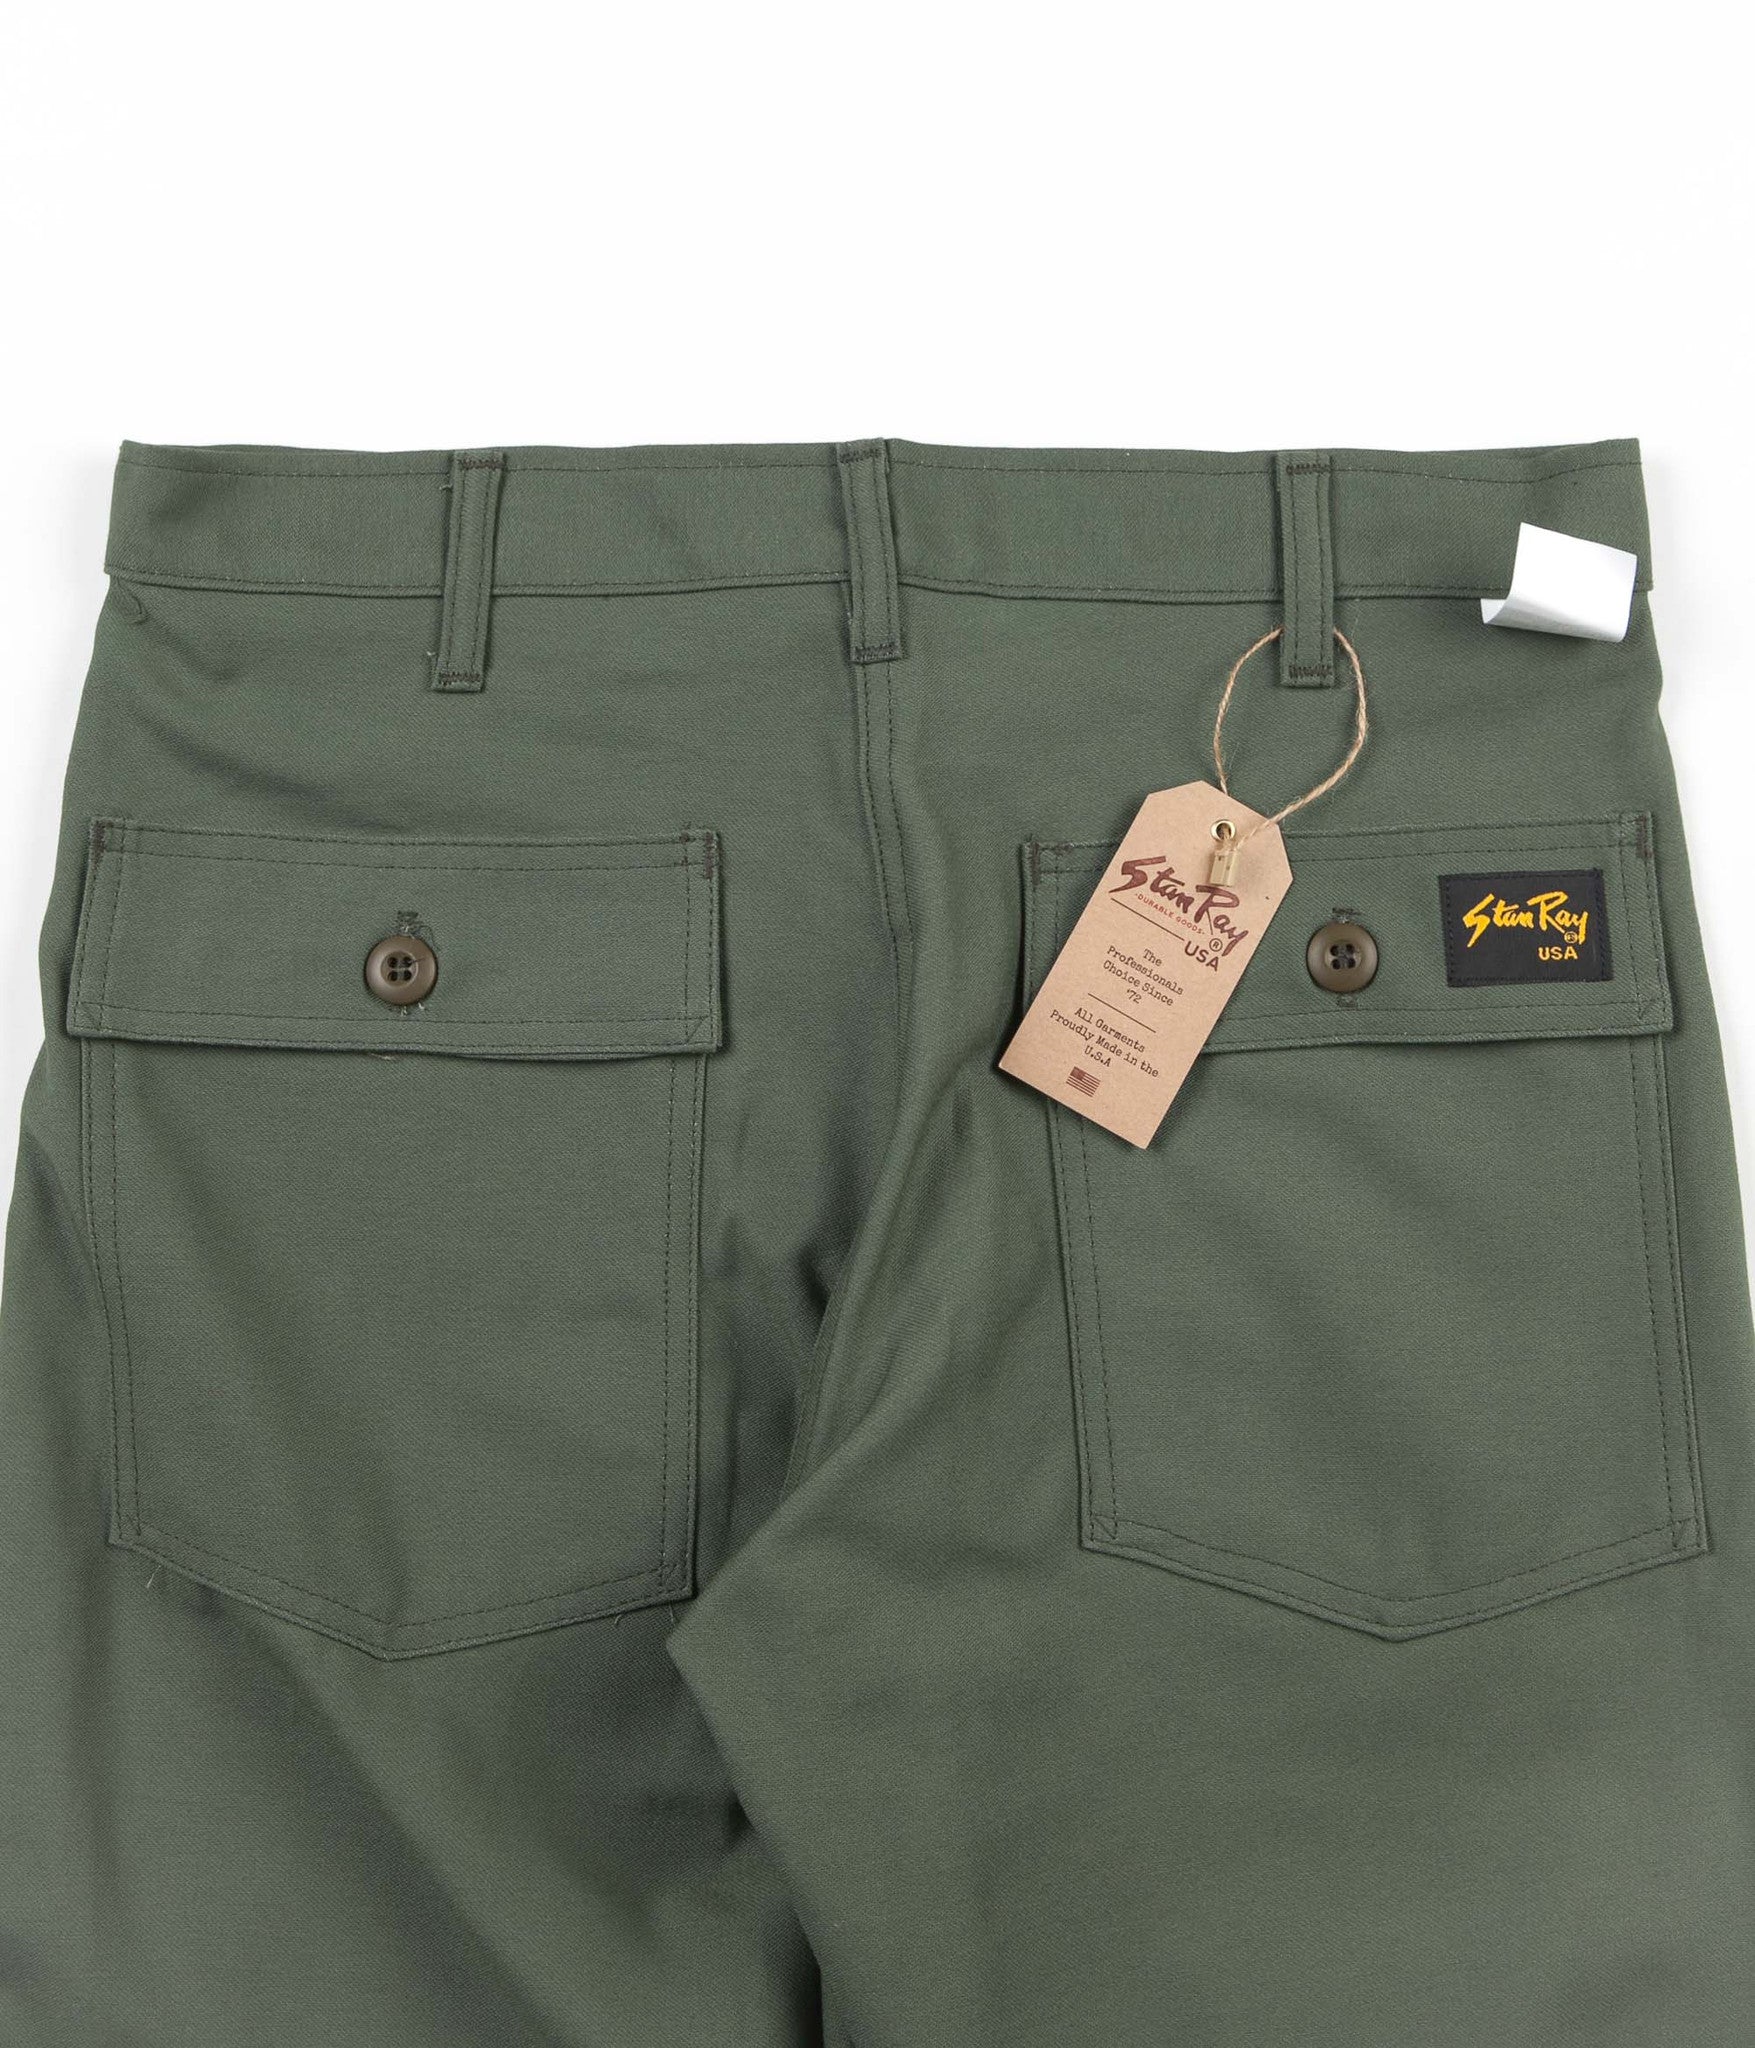 Stan Ray Slim Fit 4 Pocket Fatigue Trousers - Olive Sateen | Flatspot